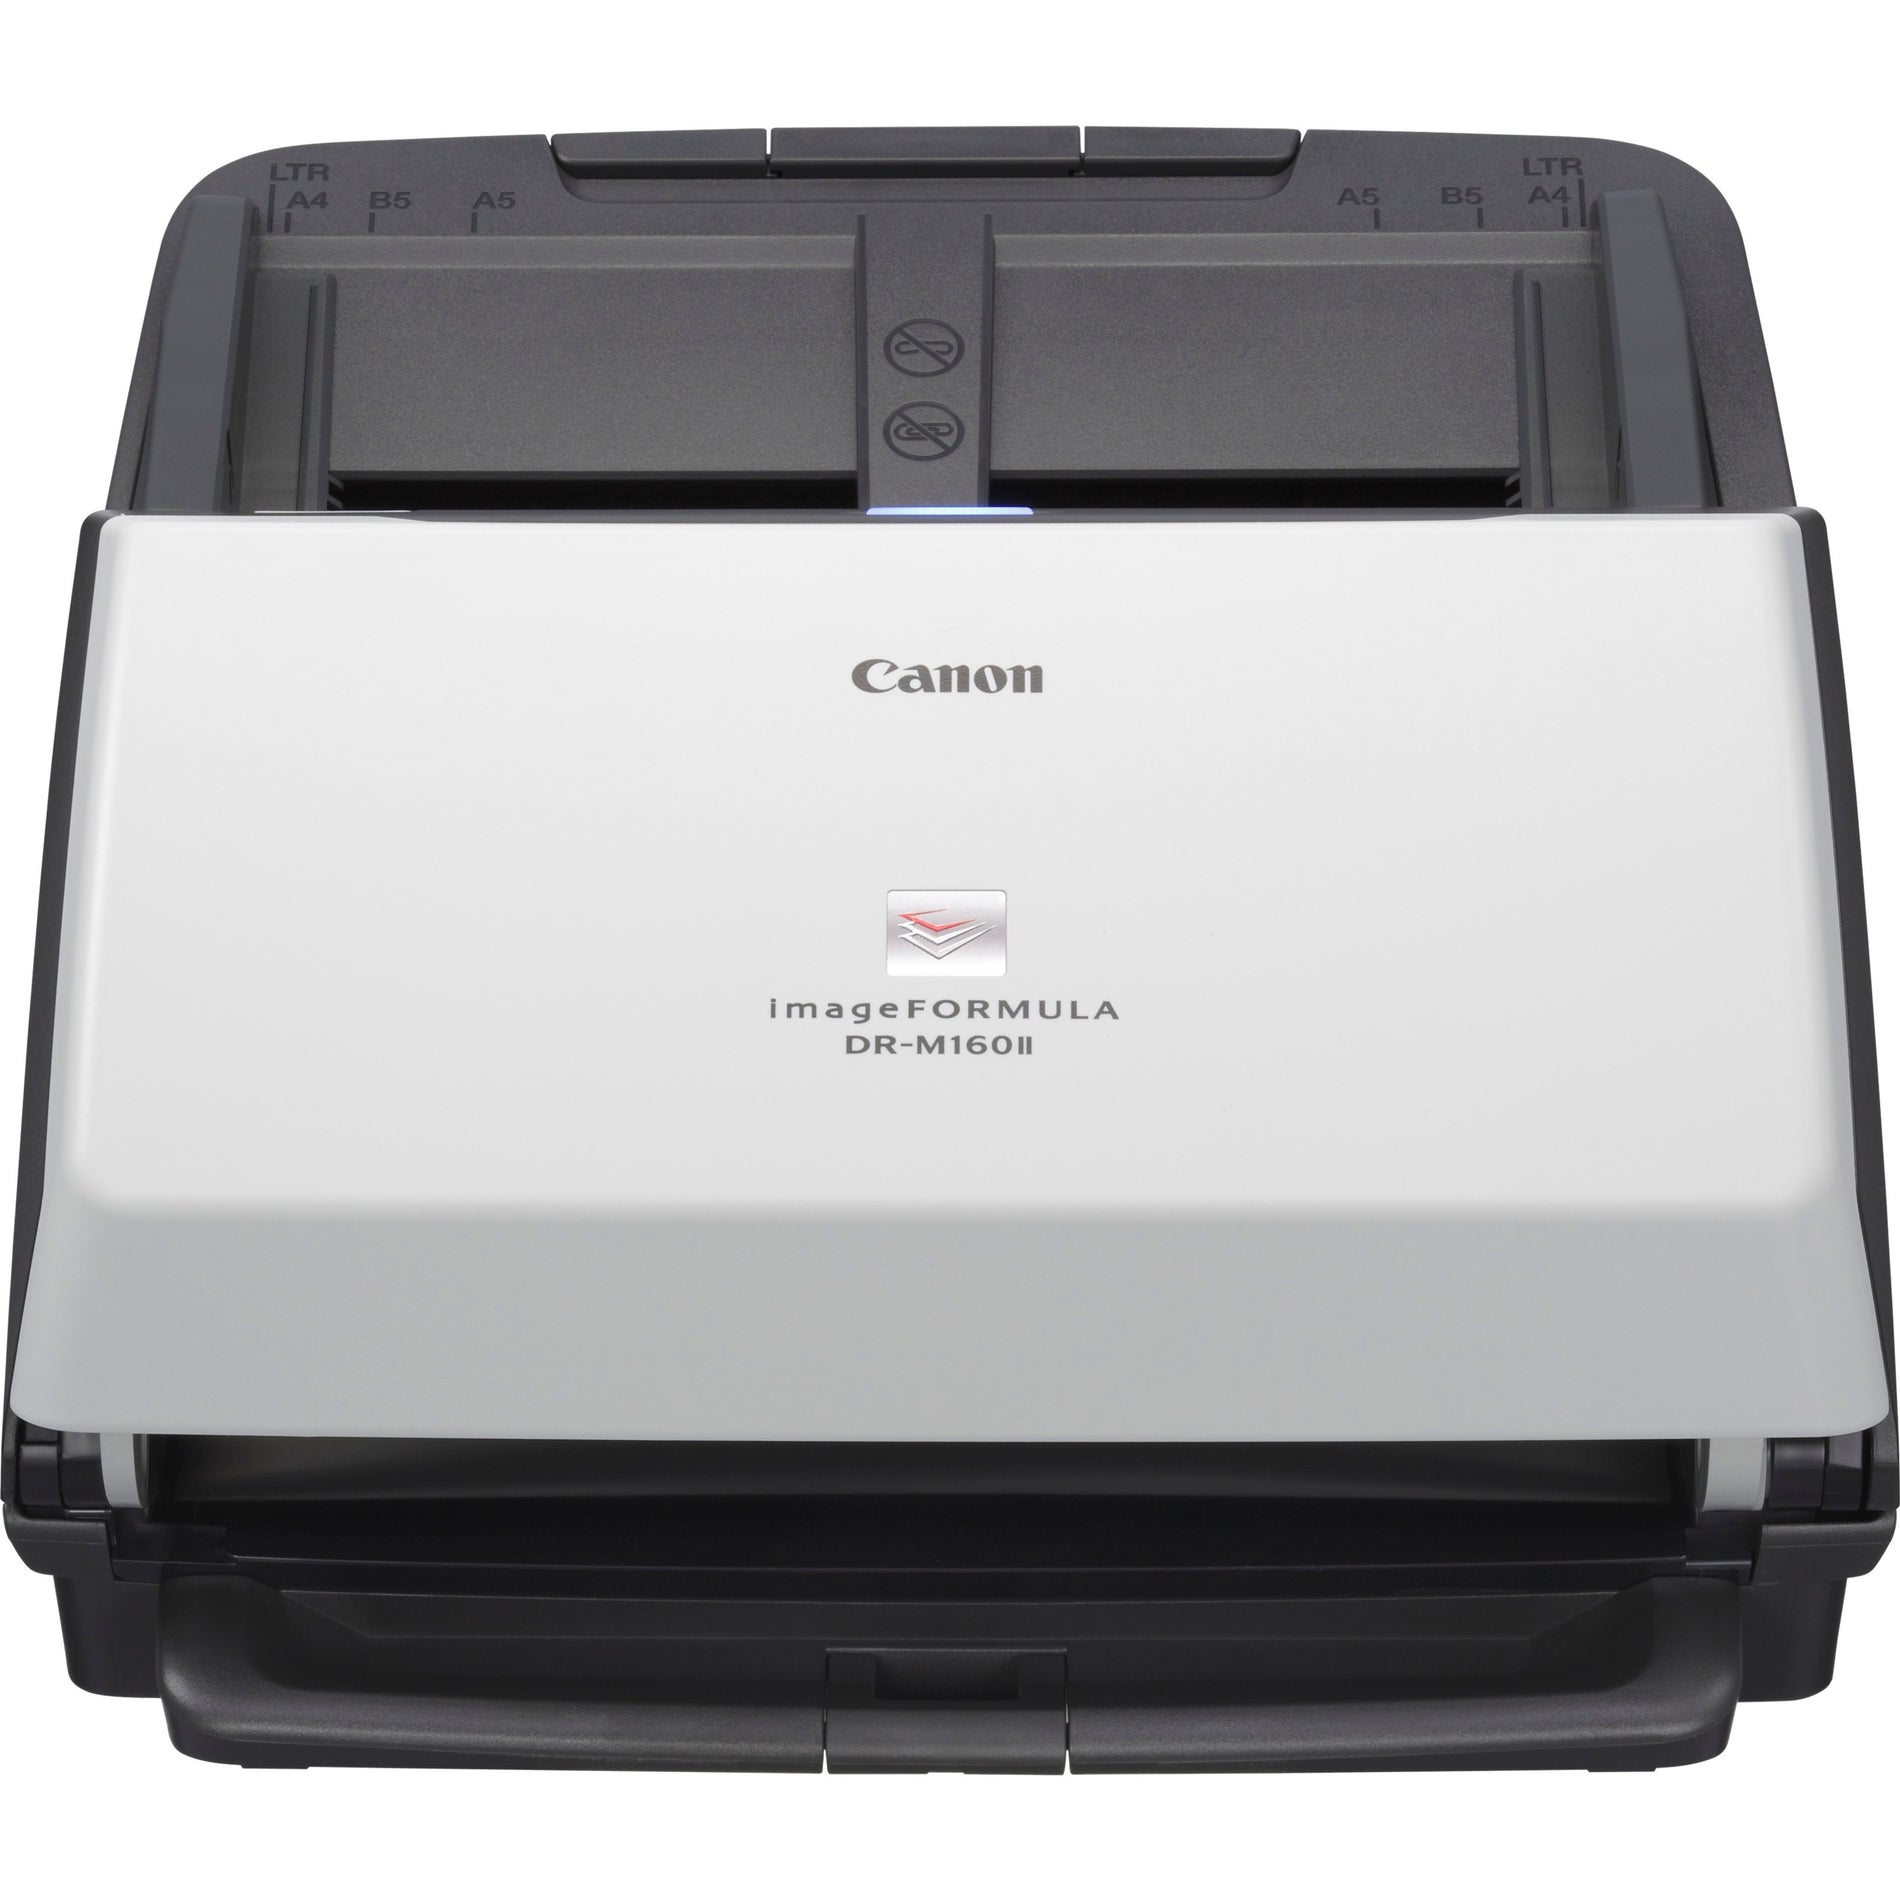 Canon 0114T279 imageFORMULA DR-M160II Sheetfed Scanner, A4 Size, Color, 60 Sheet ADF Capacity